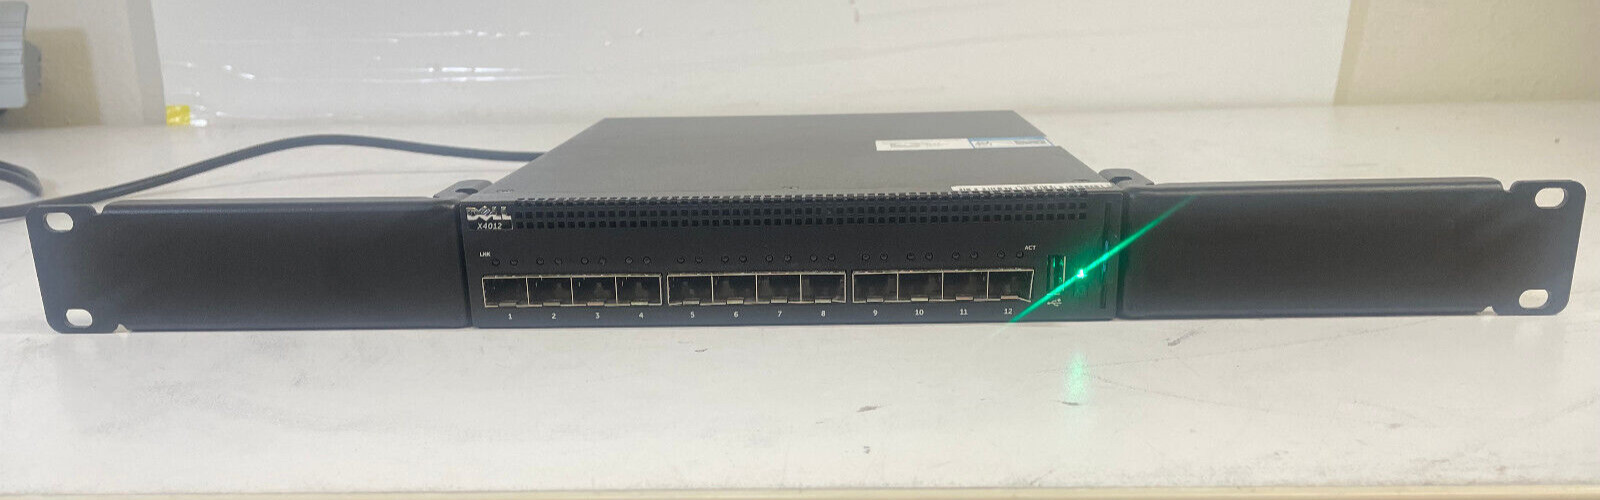 P1.a) Dell X4012 12 Port 10 Gbps SFP+ Smart Managed Switch, Factory Reset